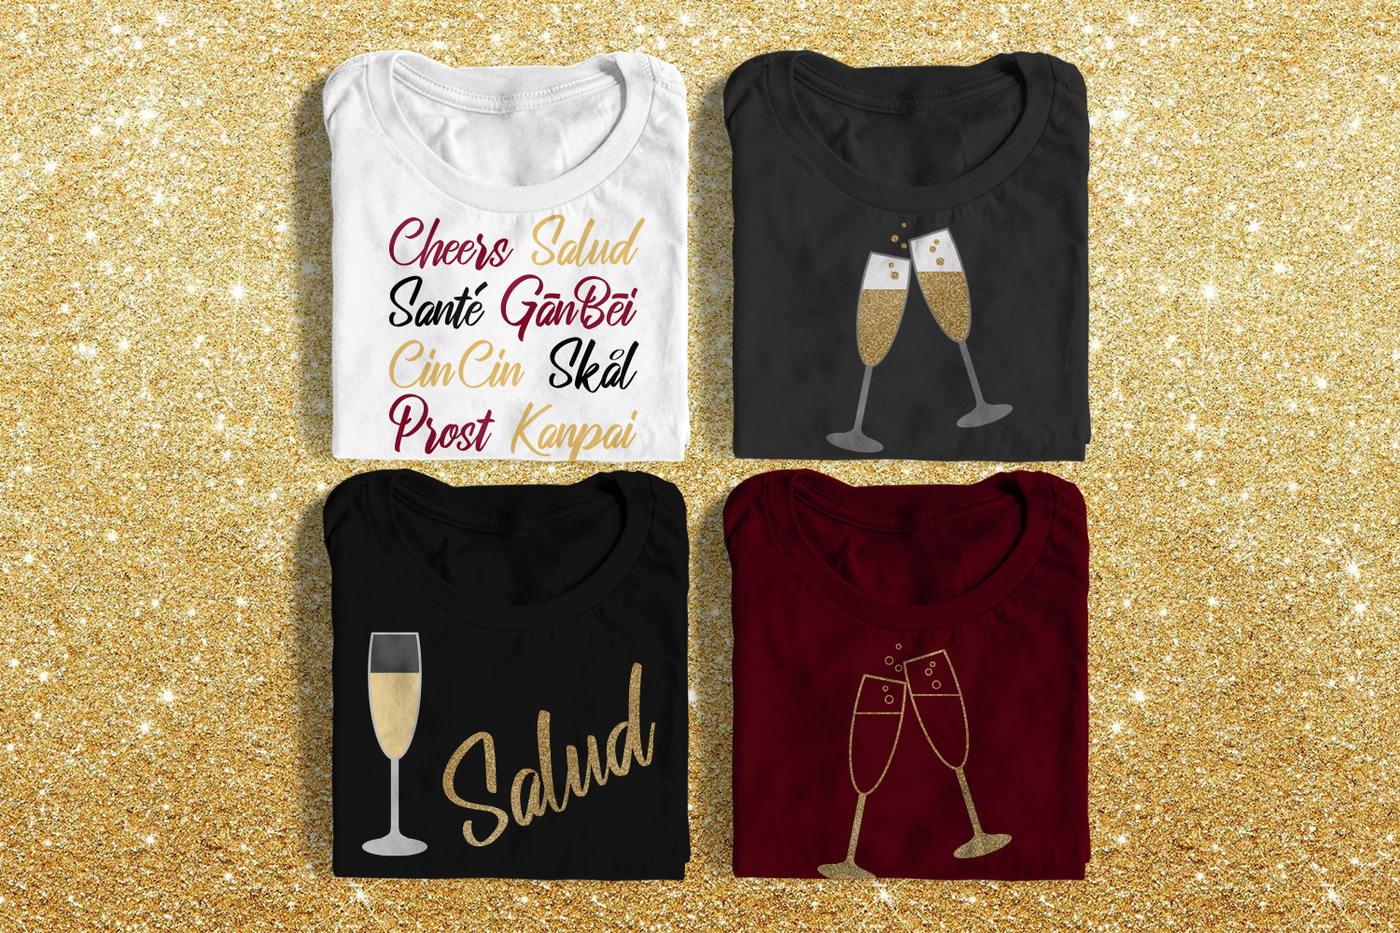 Four folded tees on a glittery gold background. One tee has the words Cheers, Salud, Sante, Gan Bei, CinCin, Skal, Prost, and Kanpai. Two tees have toasting champagne flutes, one in a single color design, the other as a multi-color design. The last tee says "Salud" with a filled champagne glass.